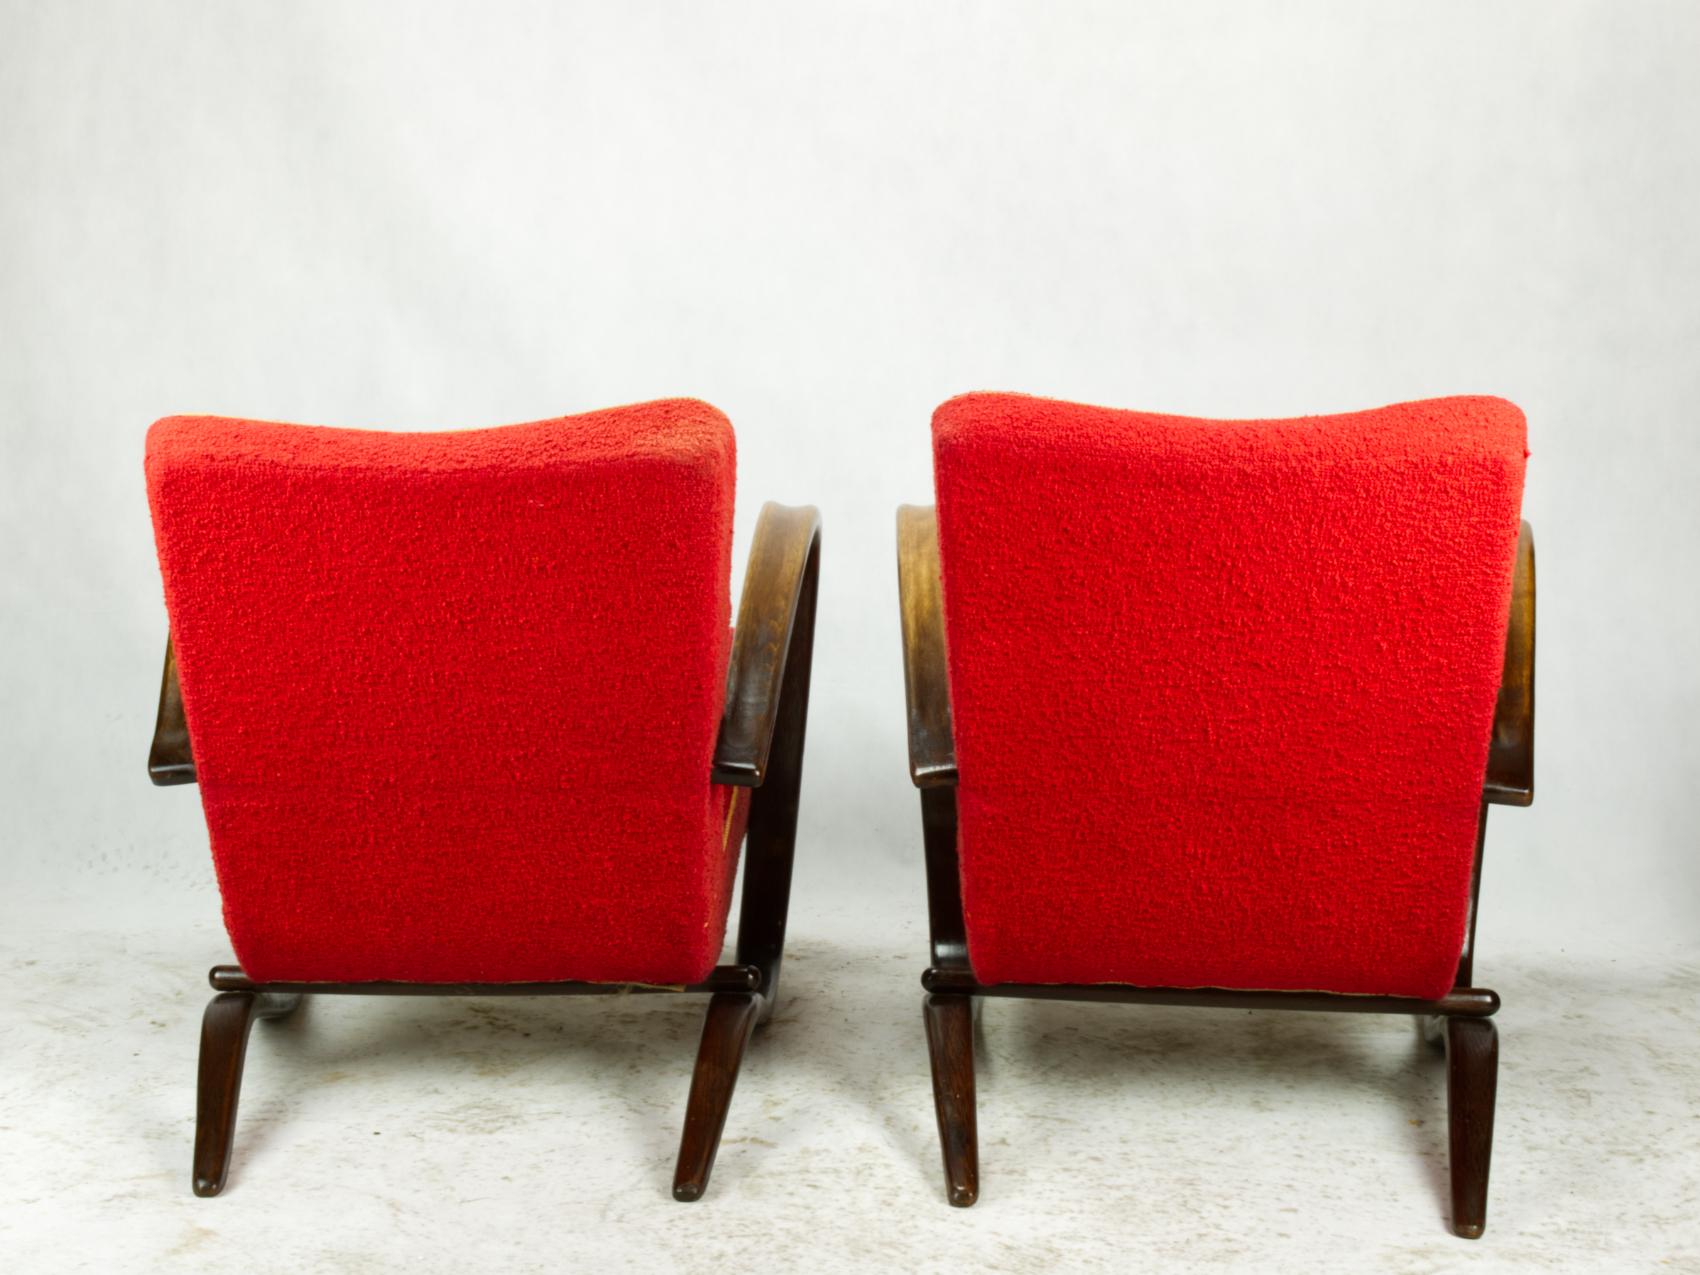 Czech Pair of H269 Lounge Chairs by Jindrich Halabala for UP Závody Brno, 1930s